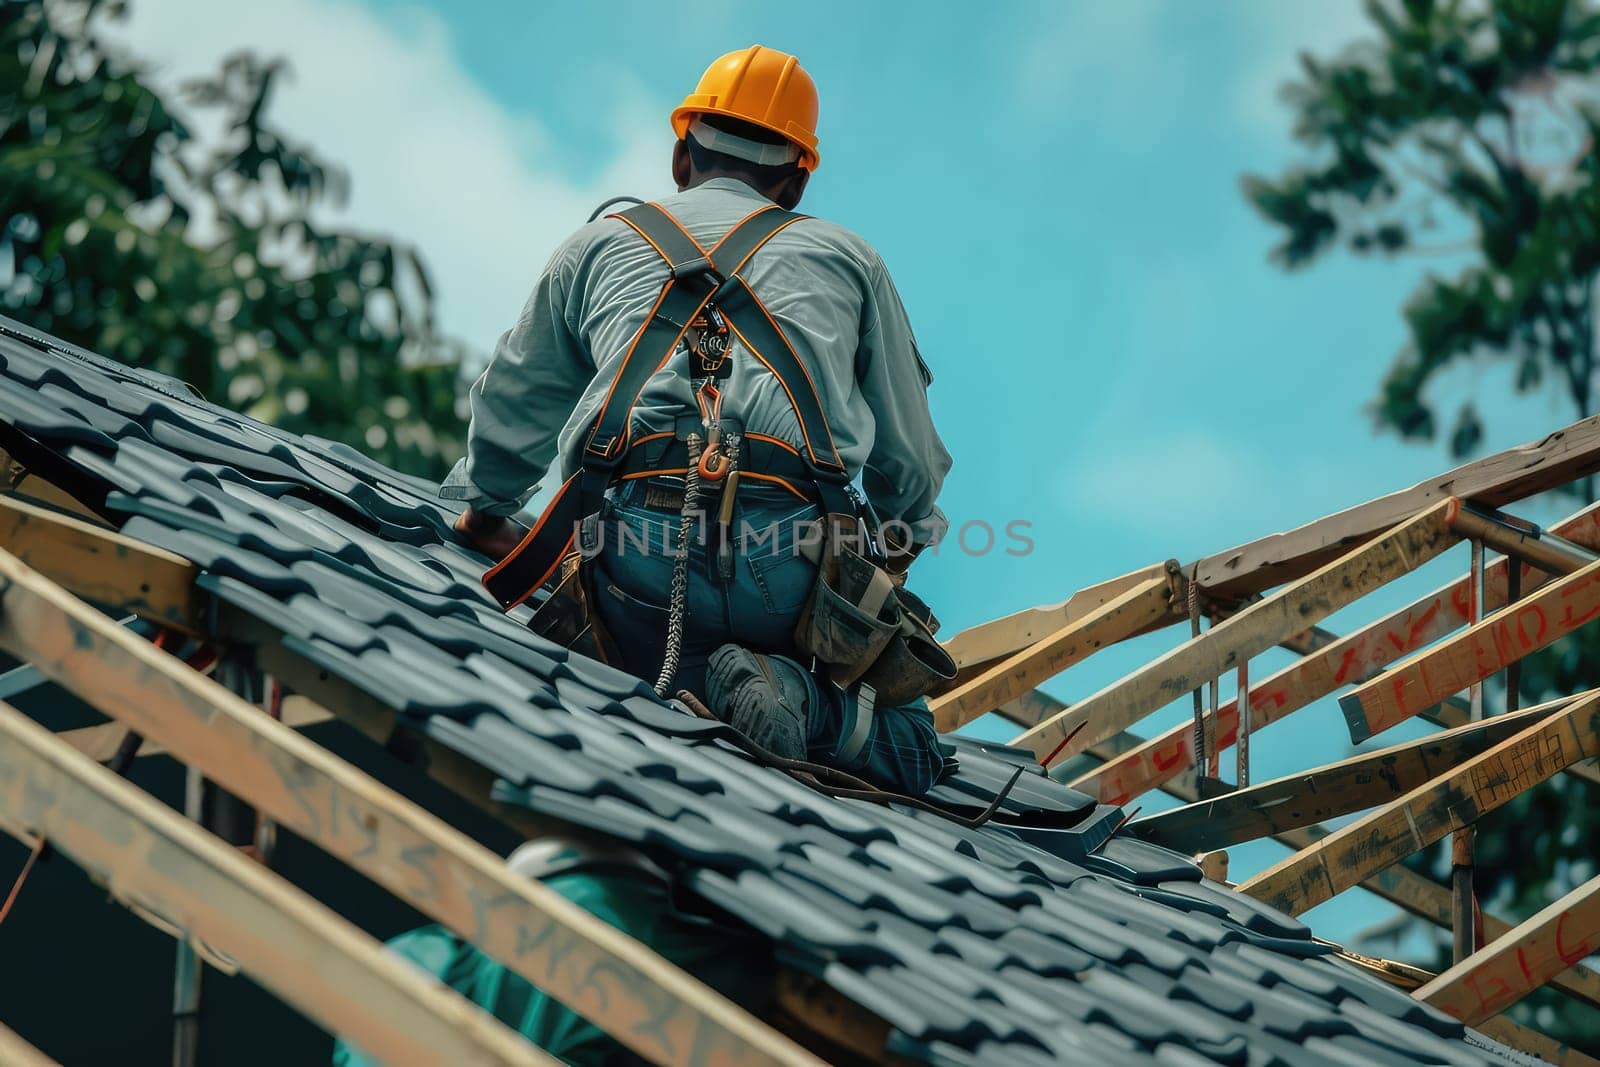 Construction Worker in Safety Gear Installing Roof Tiles with Precision and Care